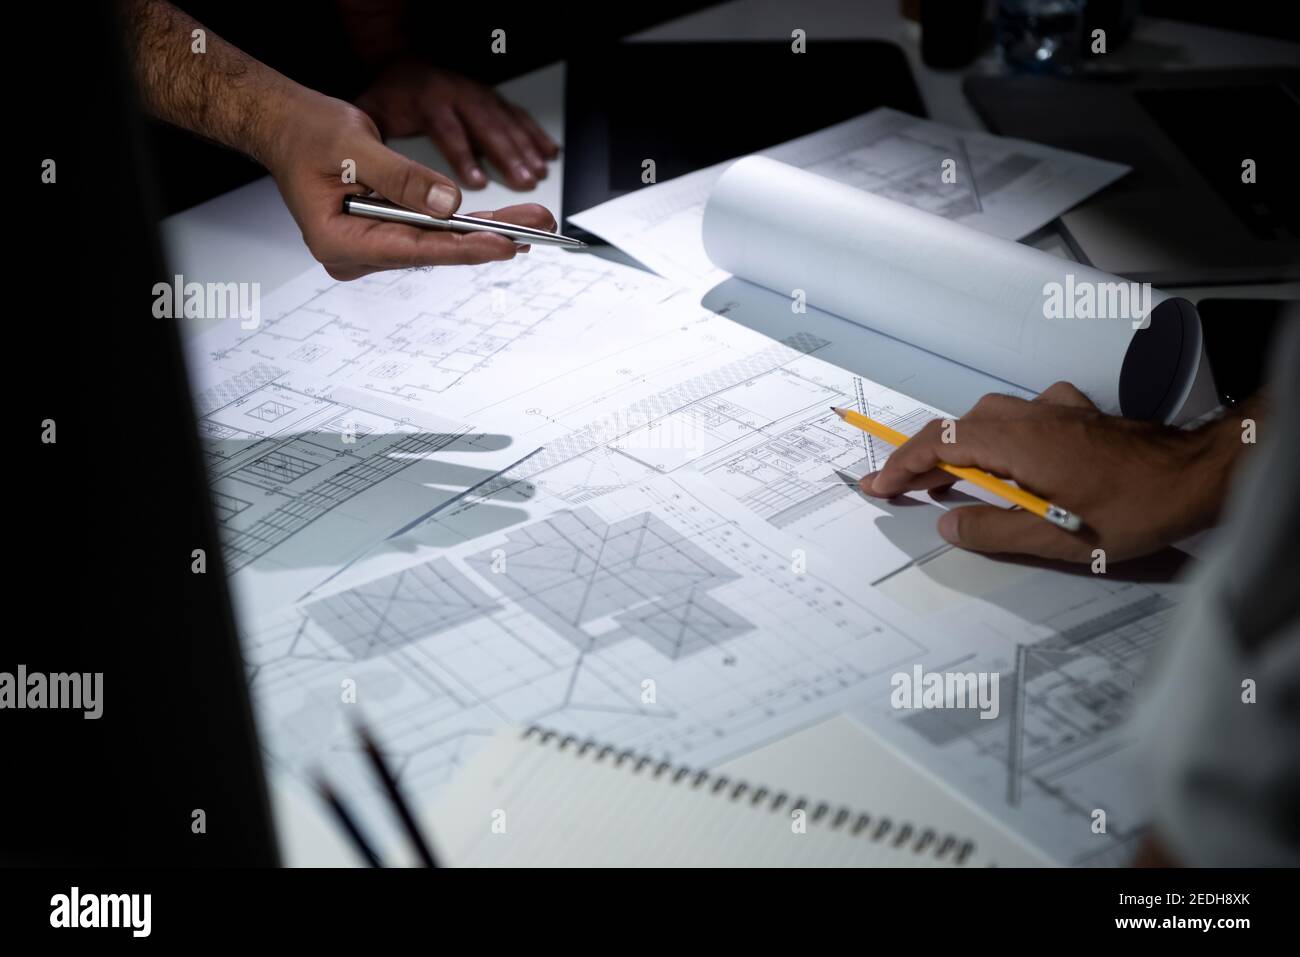 Architect team discussing project with floor plan blueprint paper on the table in office at night Stock Photo